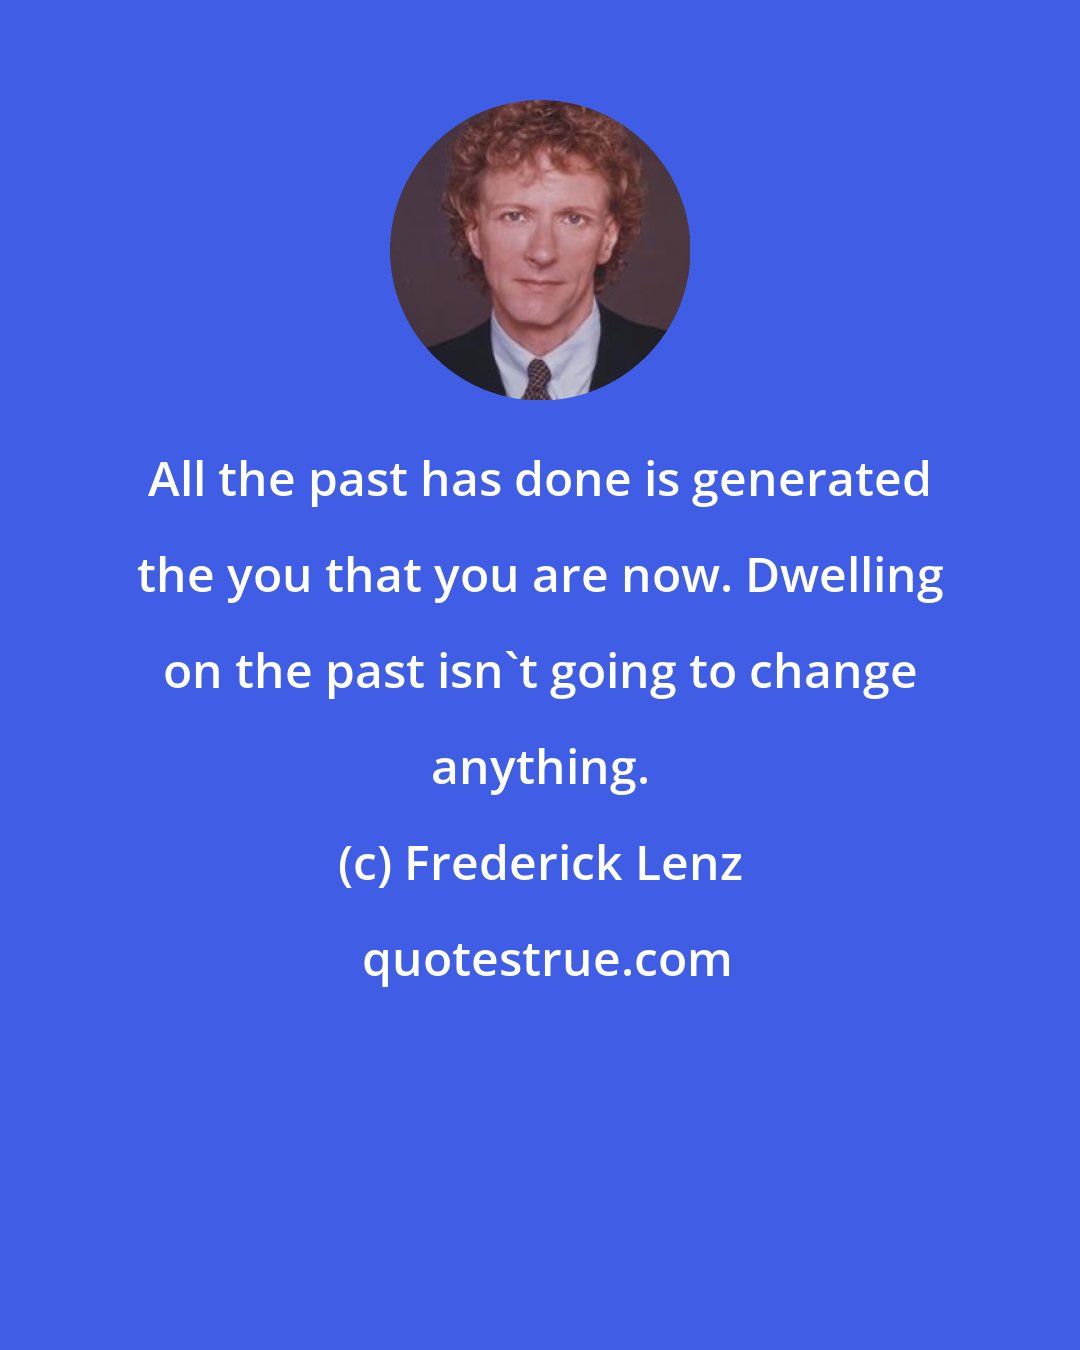 Frederick Lenz: All the past has done is generated the you that you are now. Dwelling on the past isn't going to change anything.